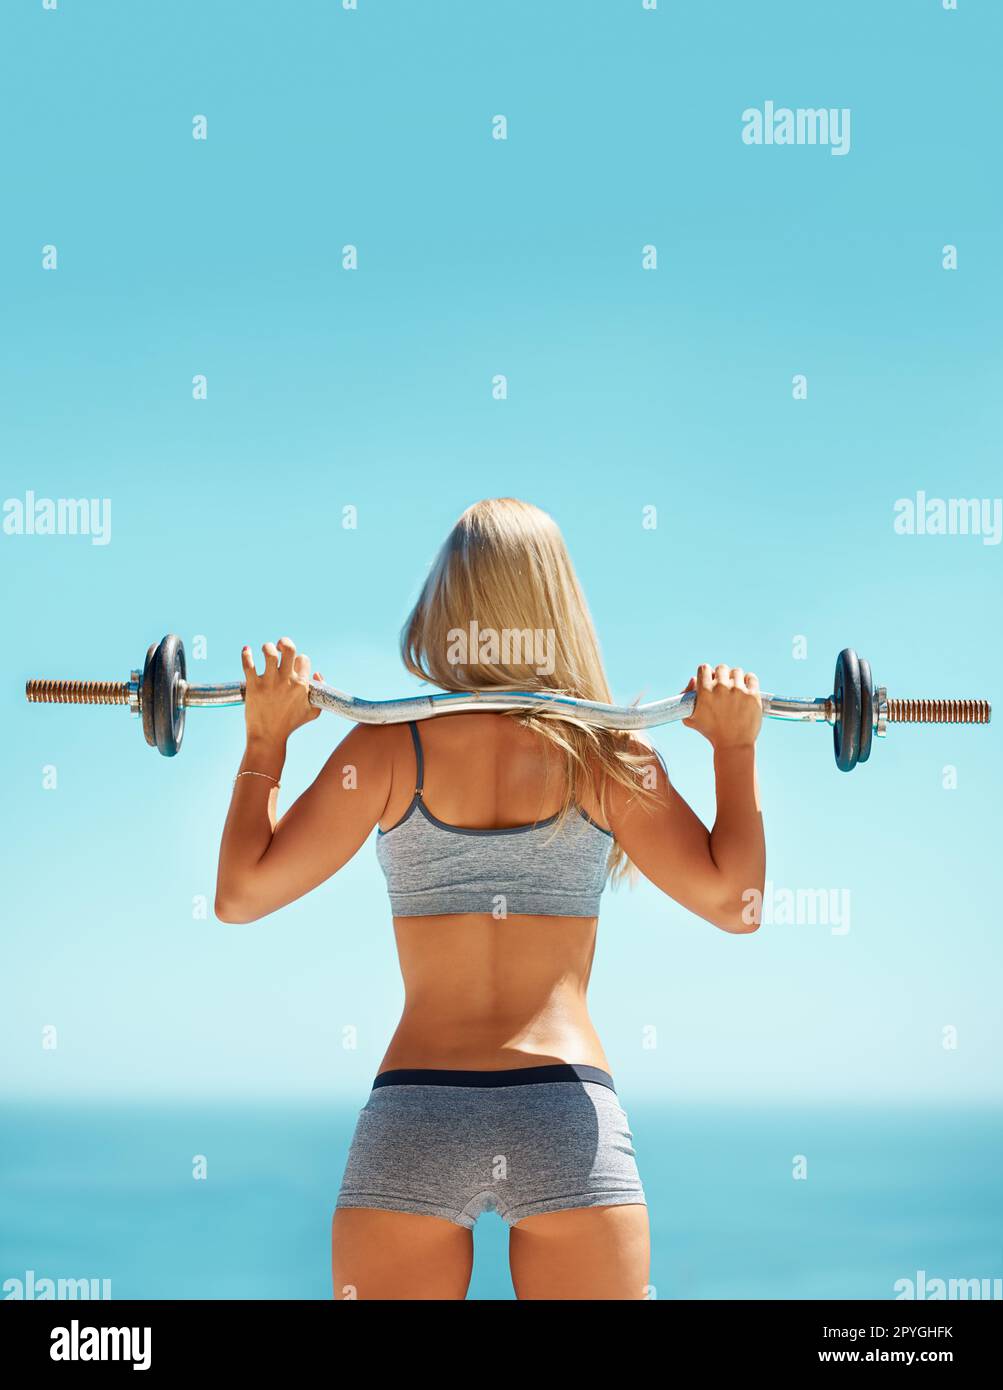 https://c8.alamy.com/comp/2PYGHFK/she-talks-big-but-she-can-back-it-up-rearview-shot-of-a-young-woman-doing-squats-with-a-barbell-outside-2PYGHFK.jpg